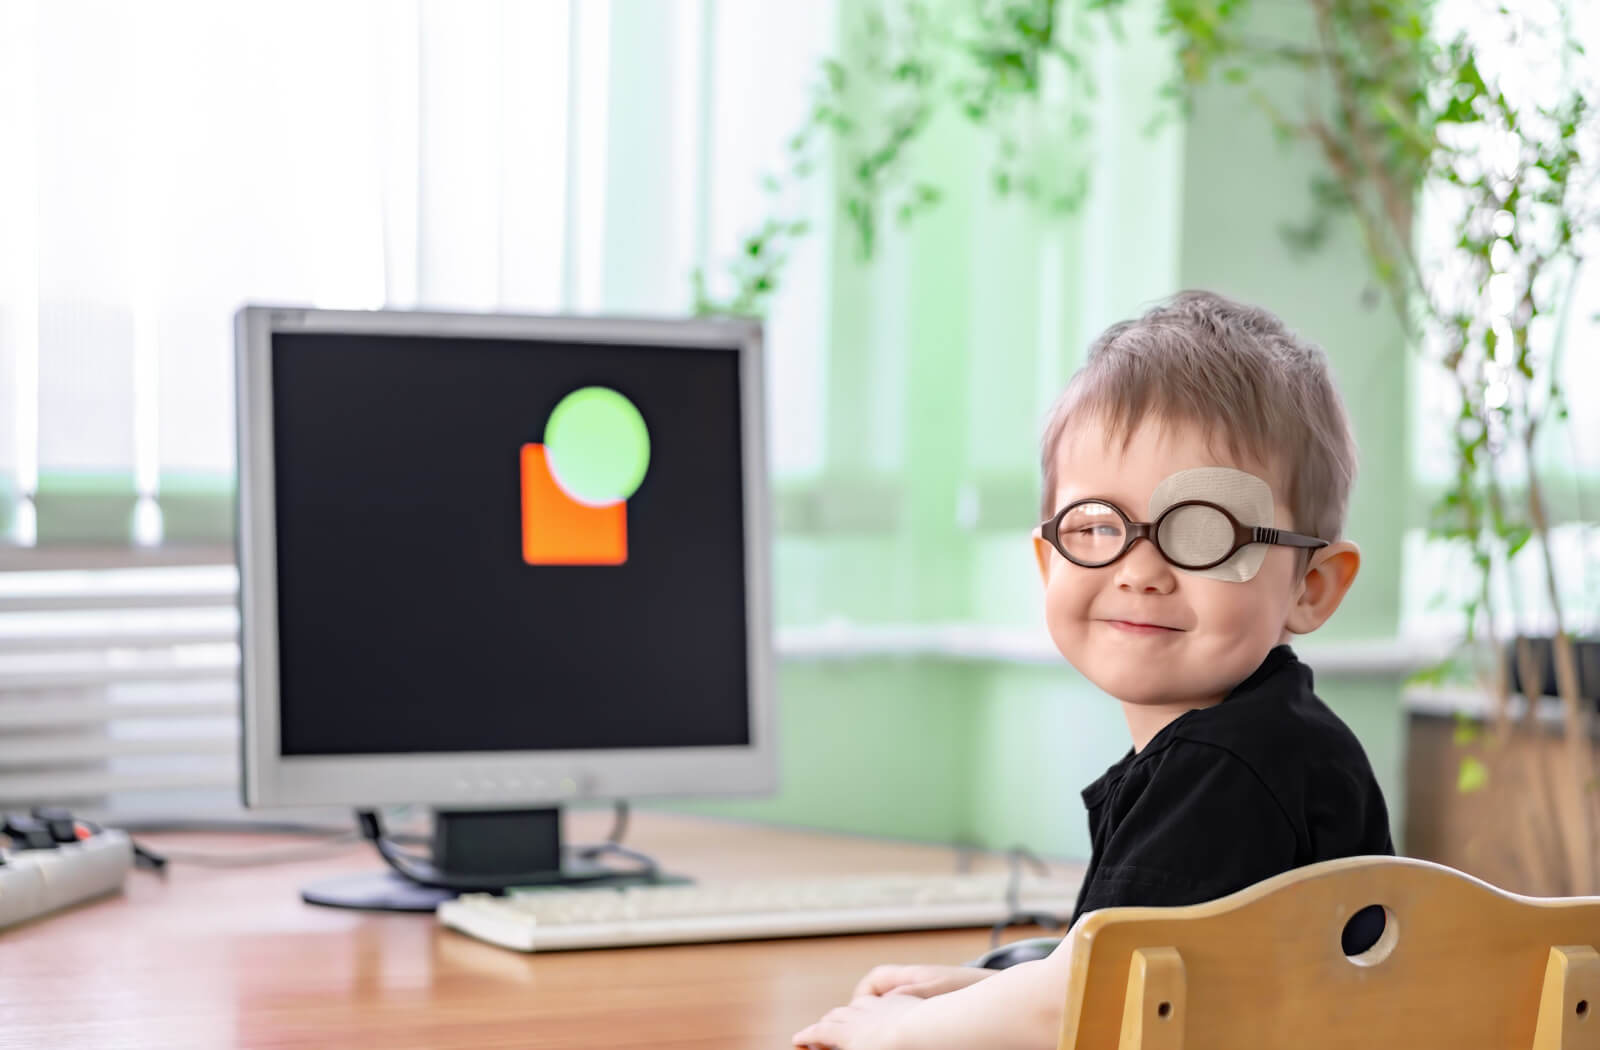 A boy with a patch on his eye sitting in front of a computer doing a vision exercise.